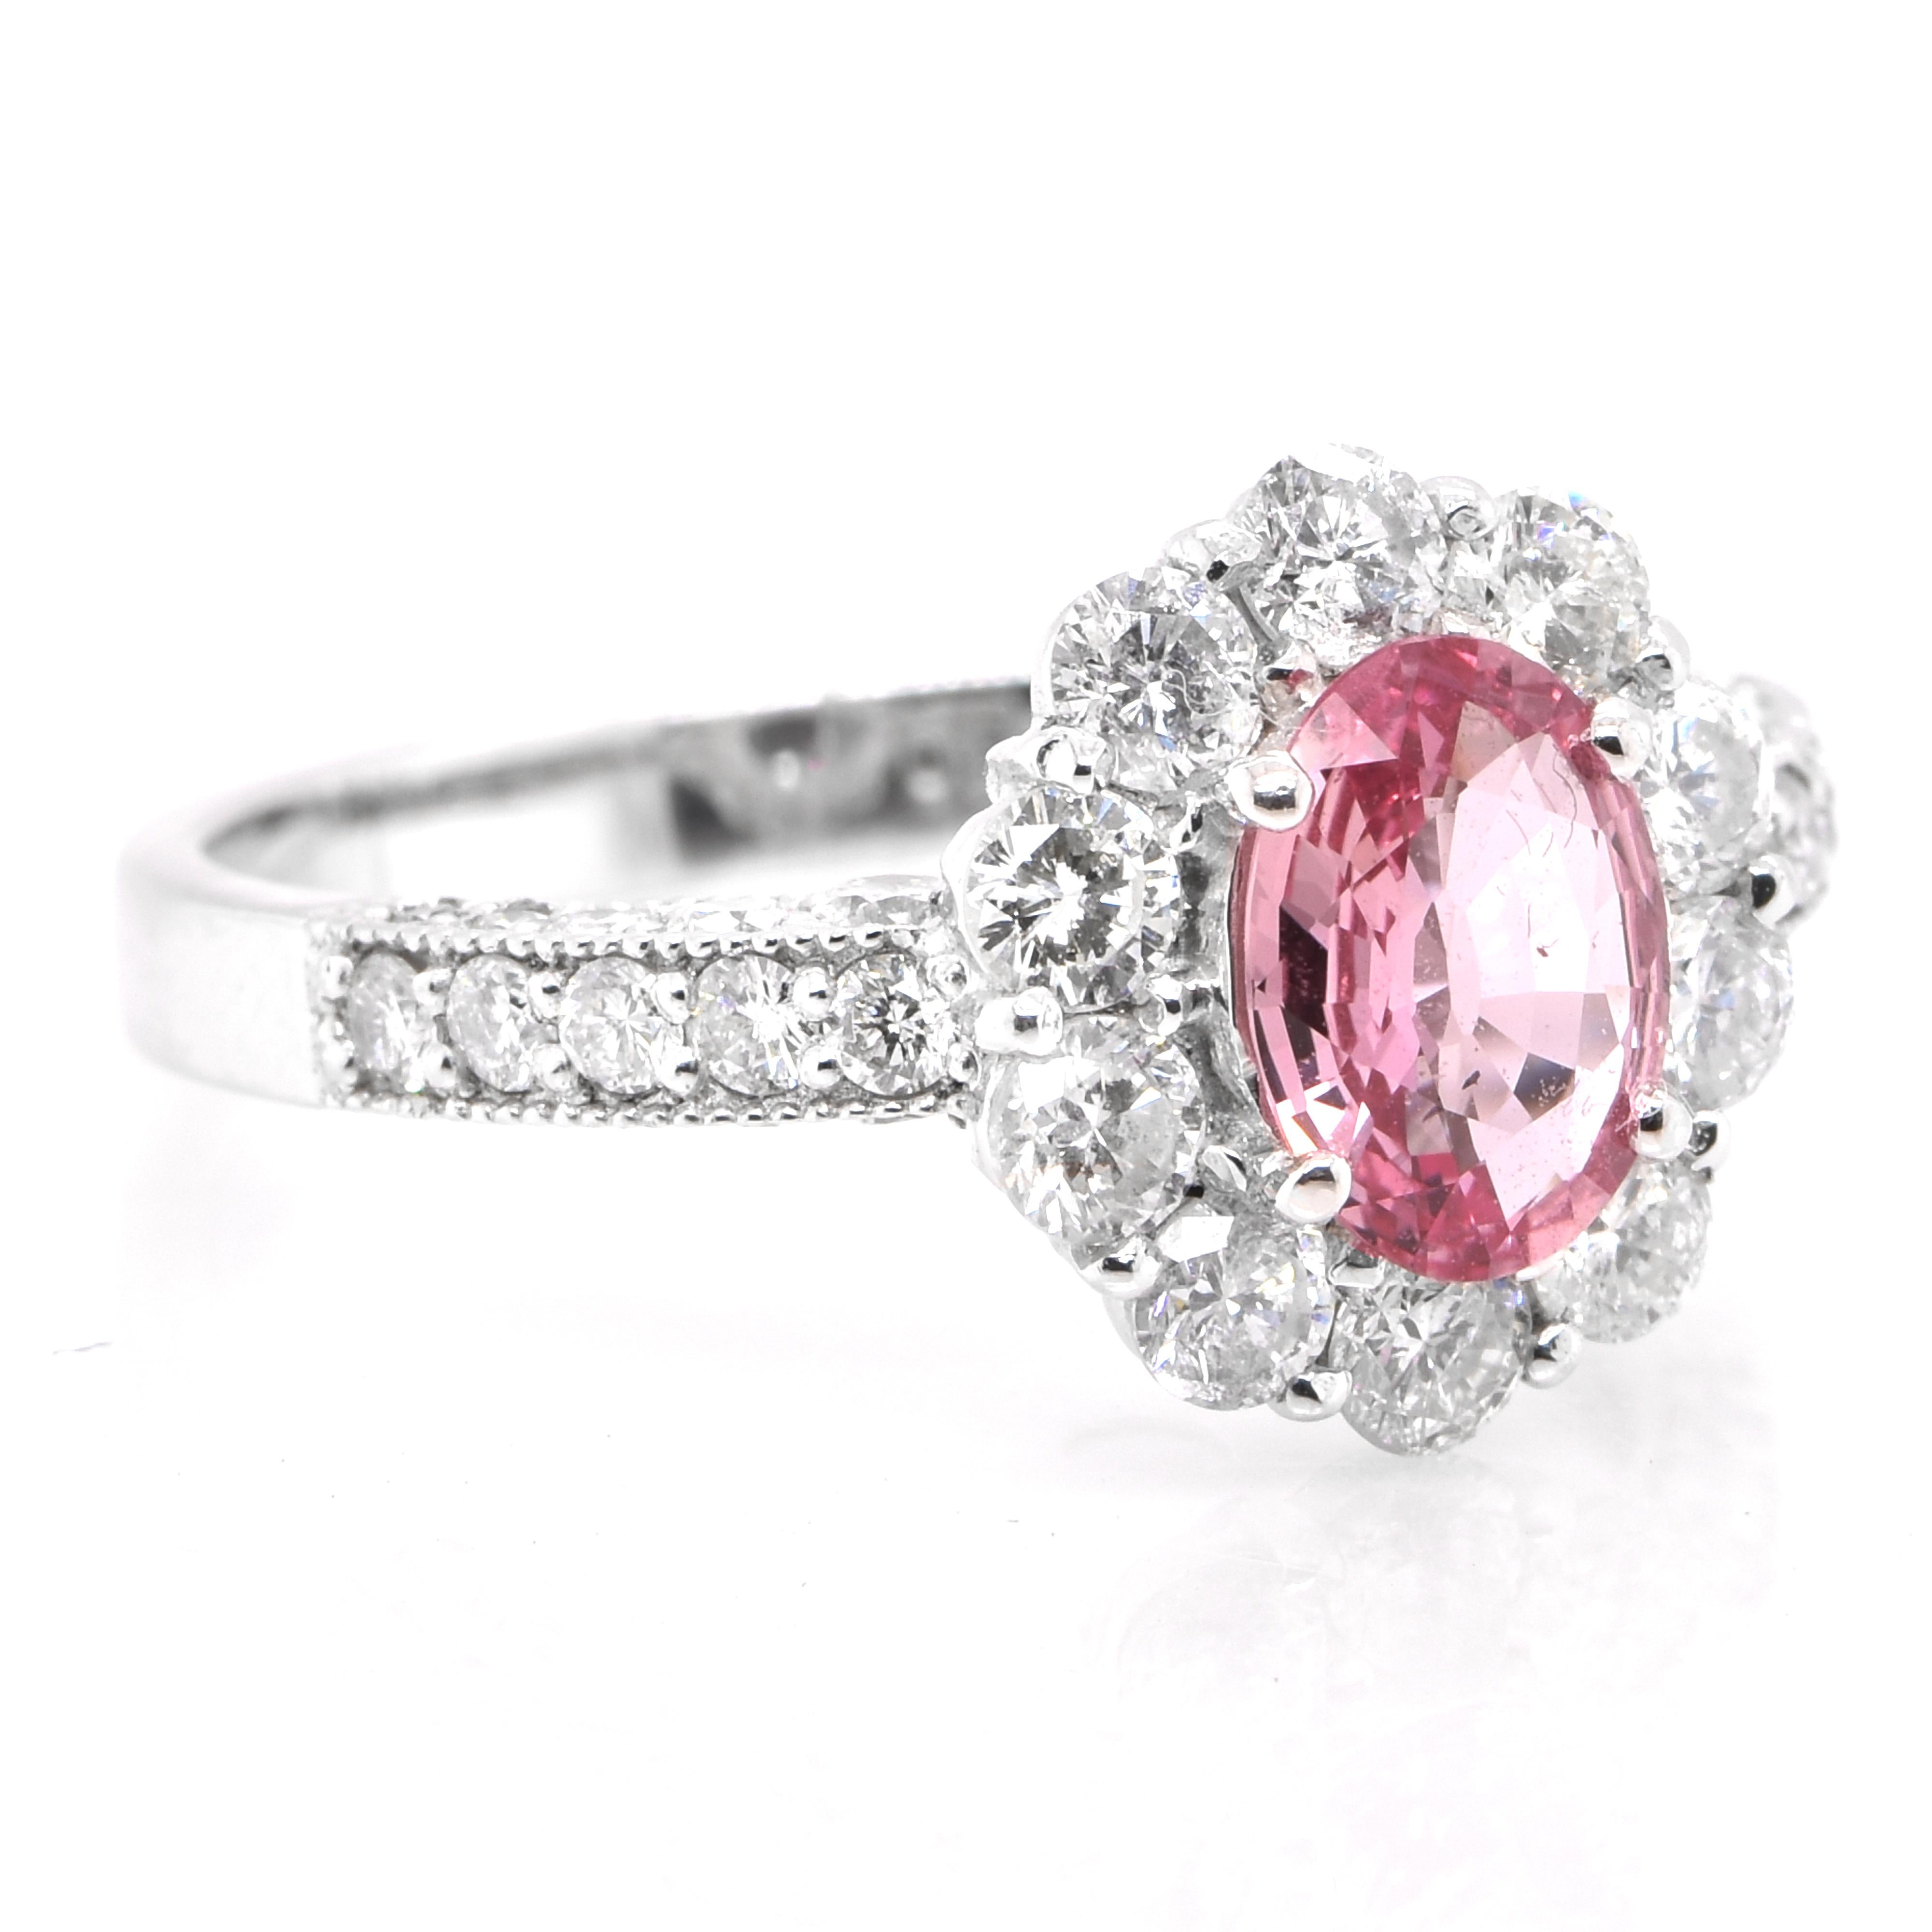 Modern 0.92 Carat Natural Padparadscha Sapphire and Diamond Ring Set in Platinum For Sale